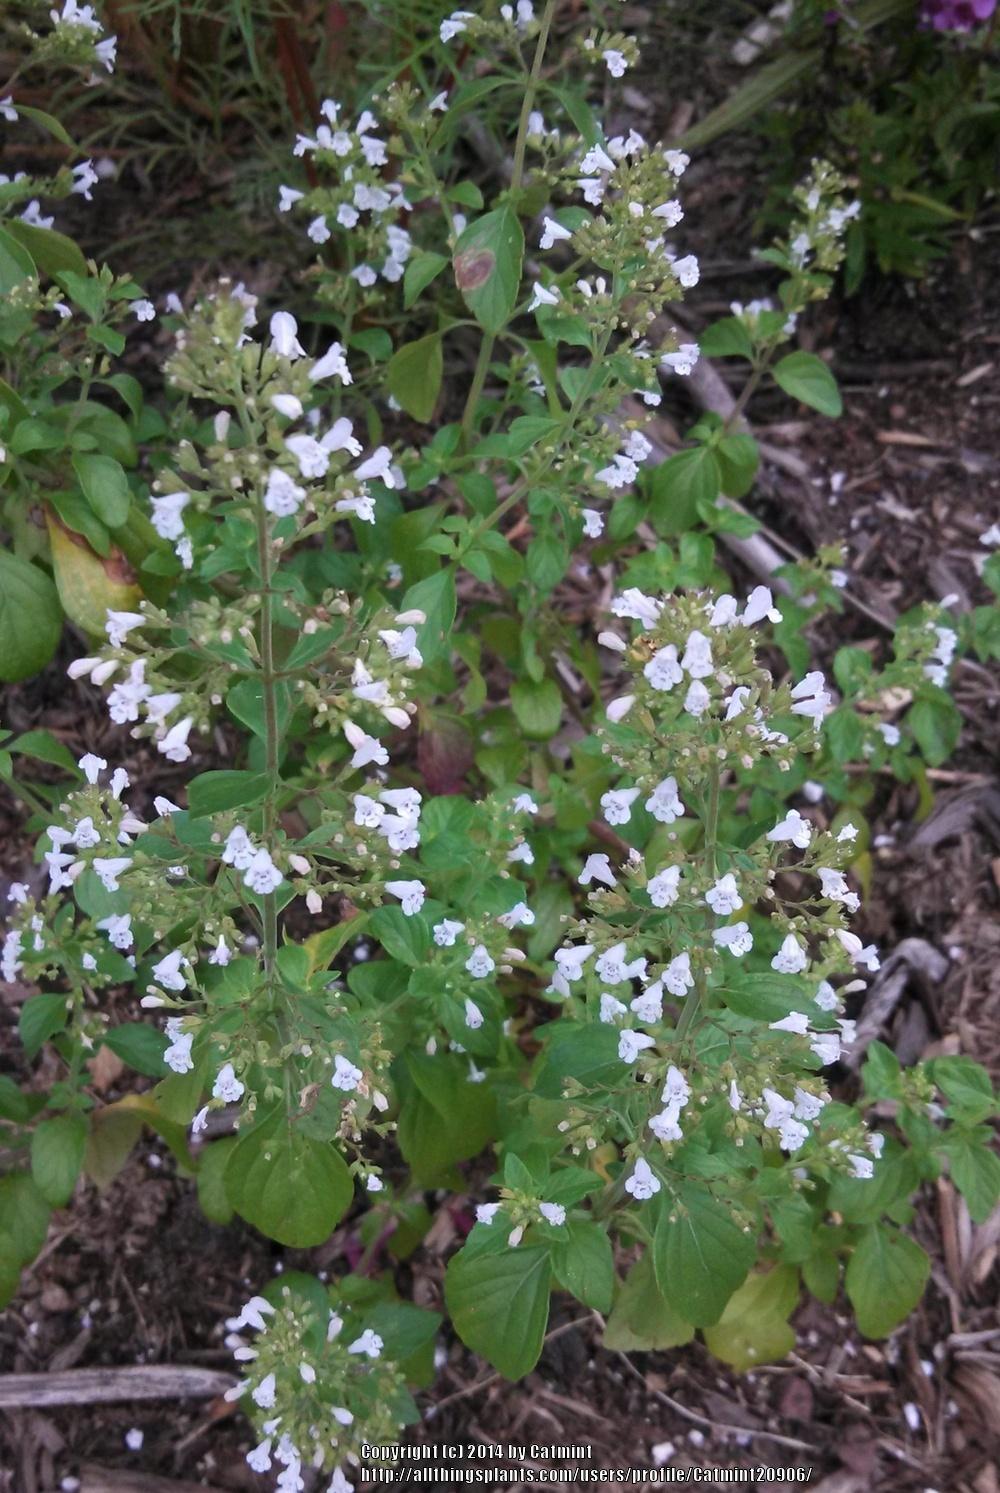 Photo of Lesser Calamint (Clinopodium nepeta 'White Cloud') uploaded by Catmint20906